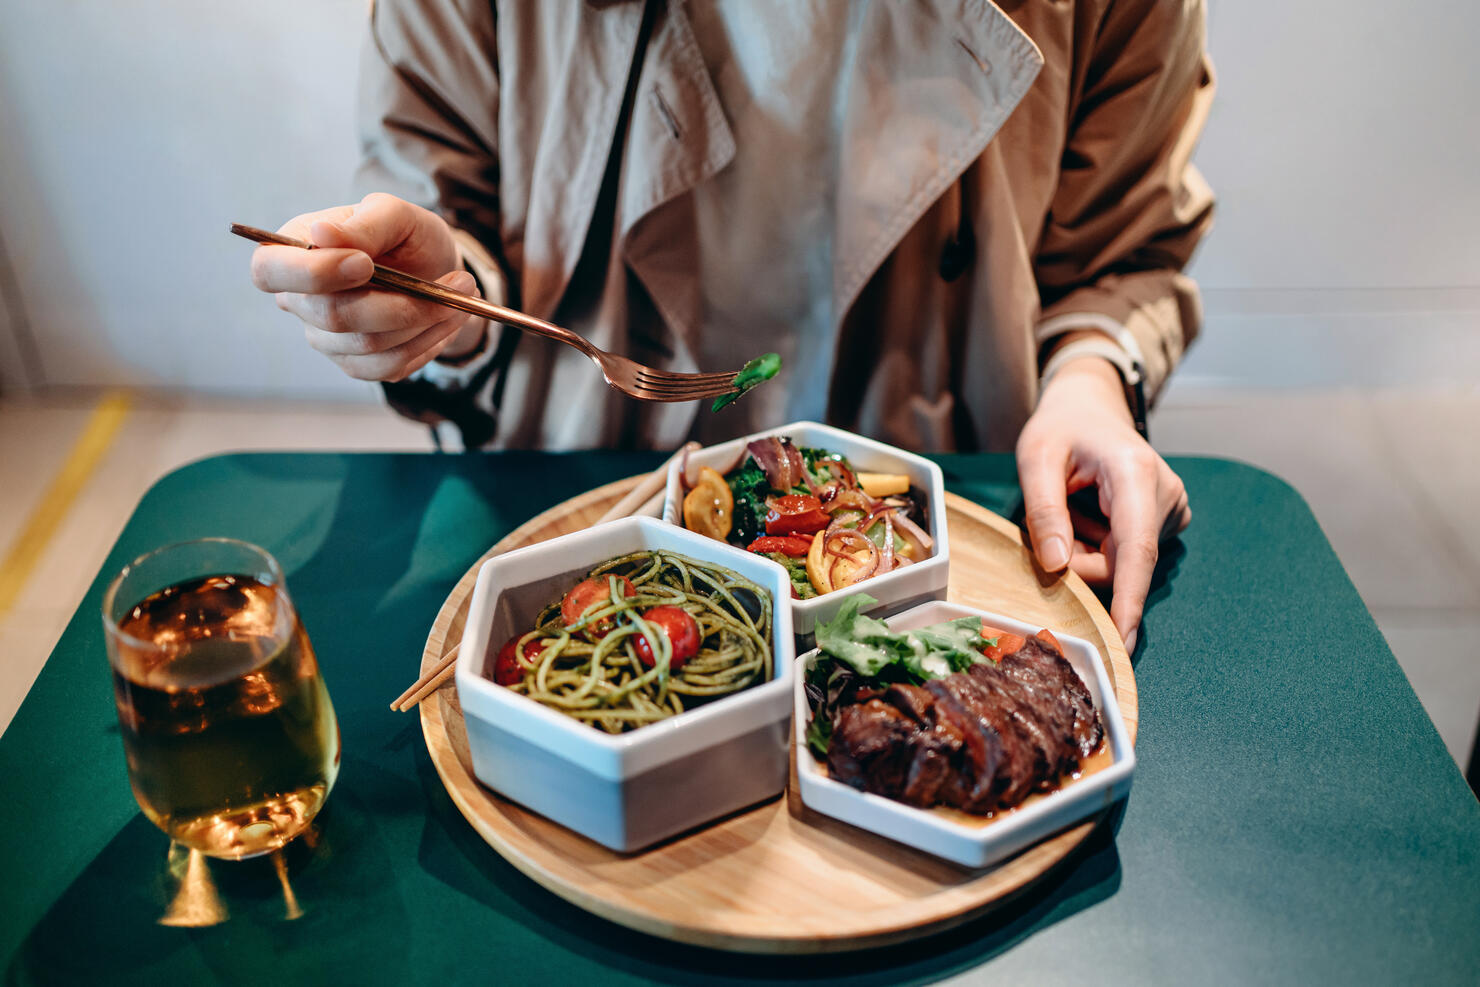 Close up of young Asian woman enjoying fusion food in a stylish restaurant. The meal set is freshly served on a  wooden tray with various nutritional ingredients to create a balanced and healthy diet. Farm-to-table, healthy eating concept